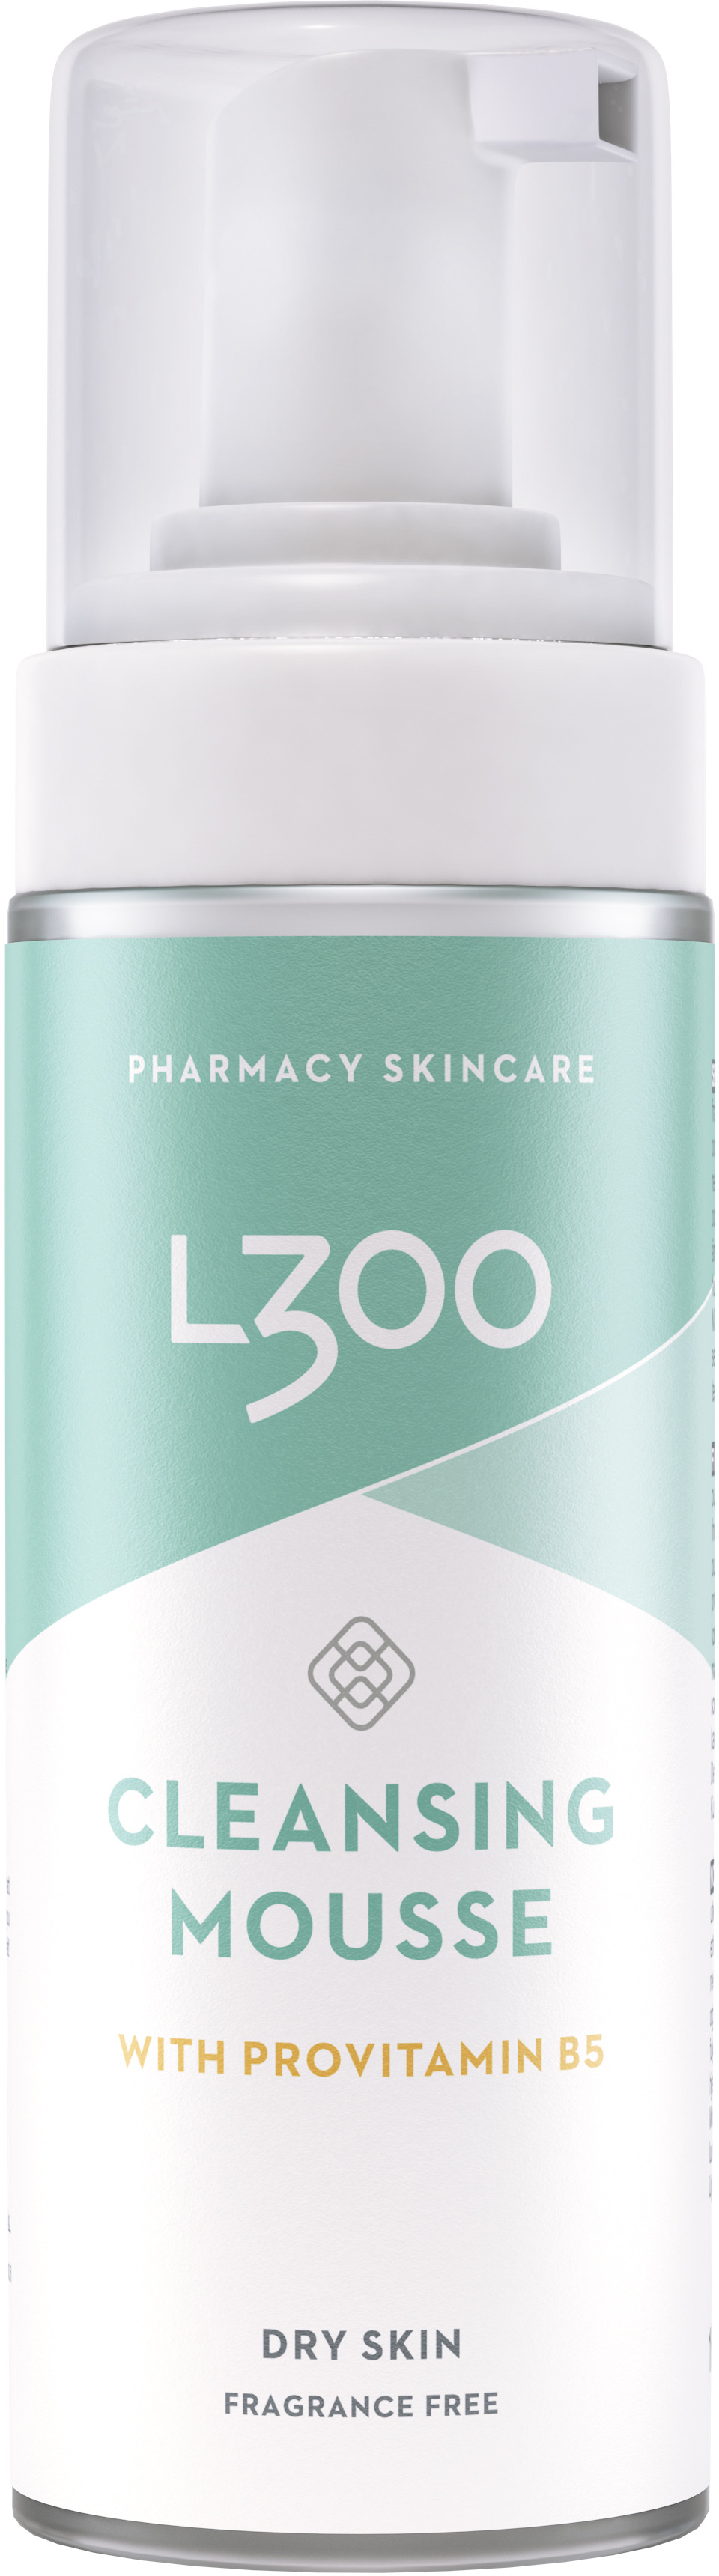 L300 Cleansing Mousse 150 ml